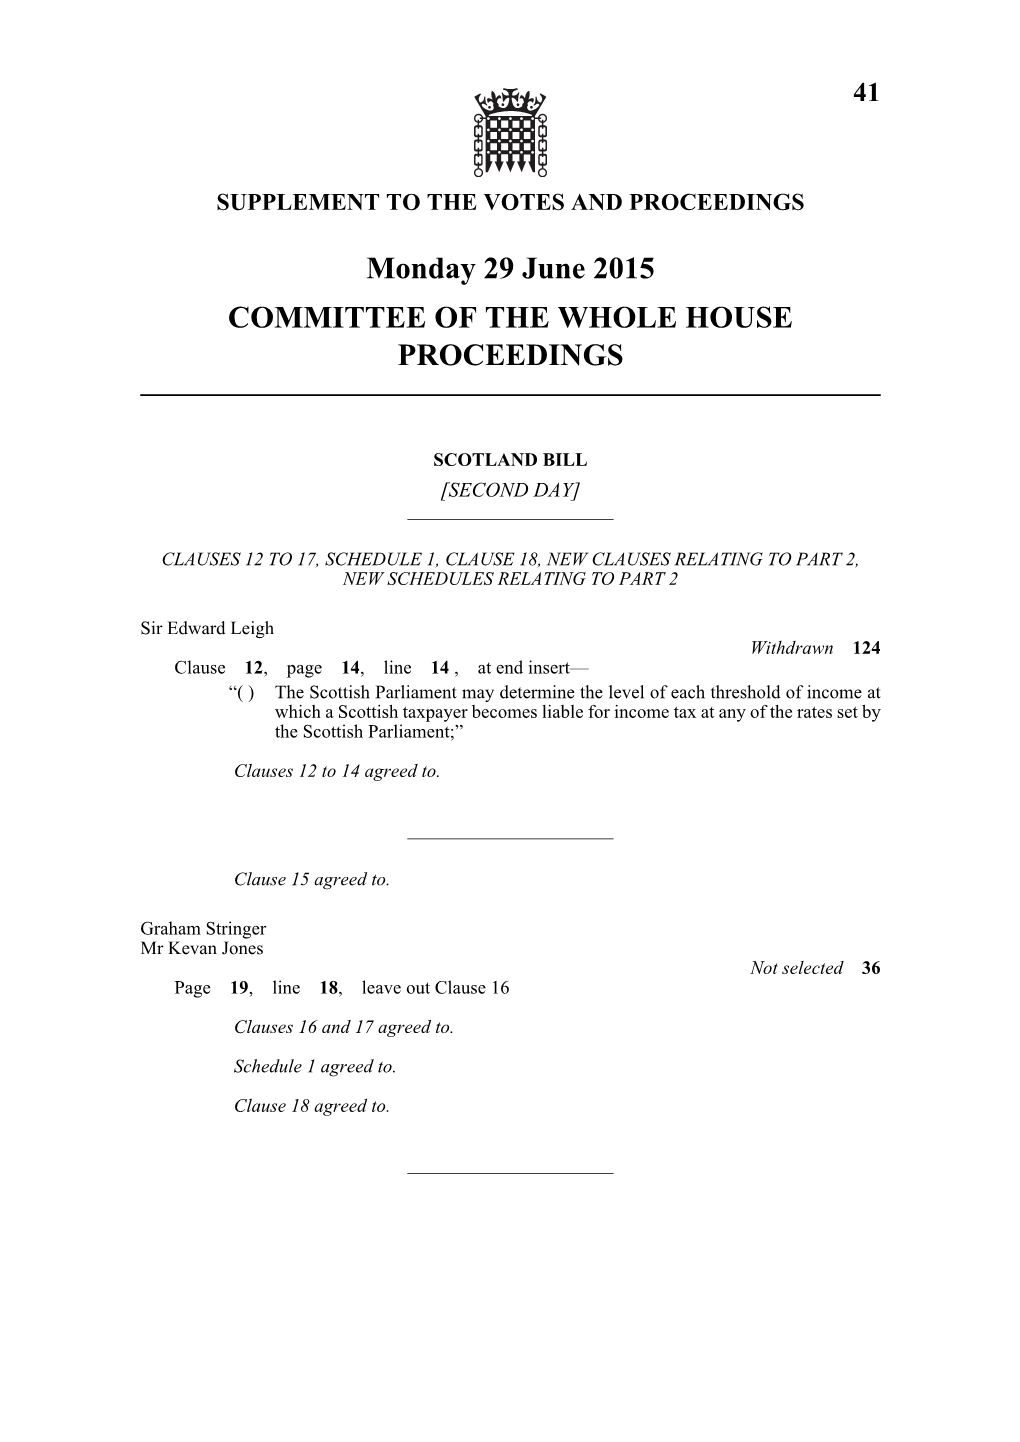 Monday 29 June 2015 COMMITTEE of the WHOLE HOUSE PROCEEDINGS